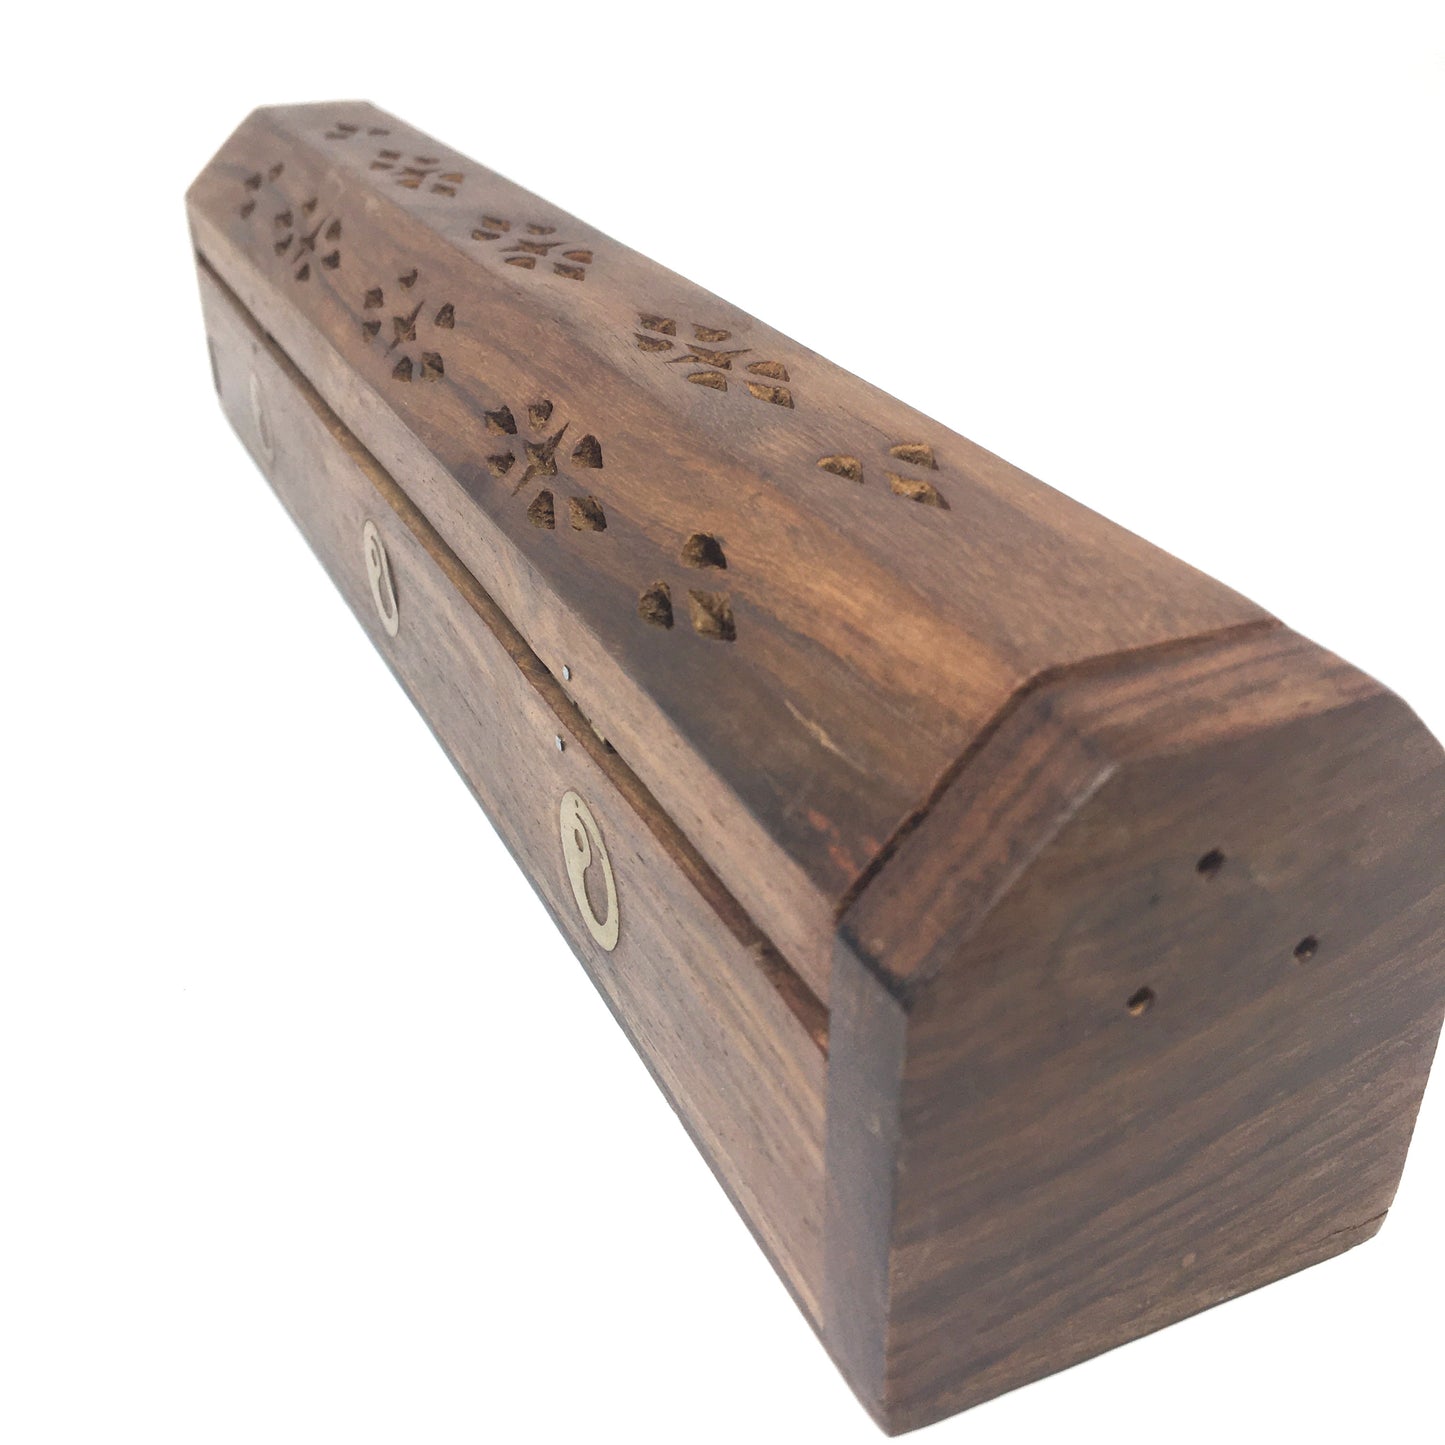 Handcrafted Incense Burner - Wooden Box With Storage - Decorative Brass Inlays